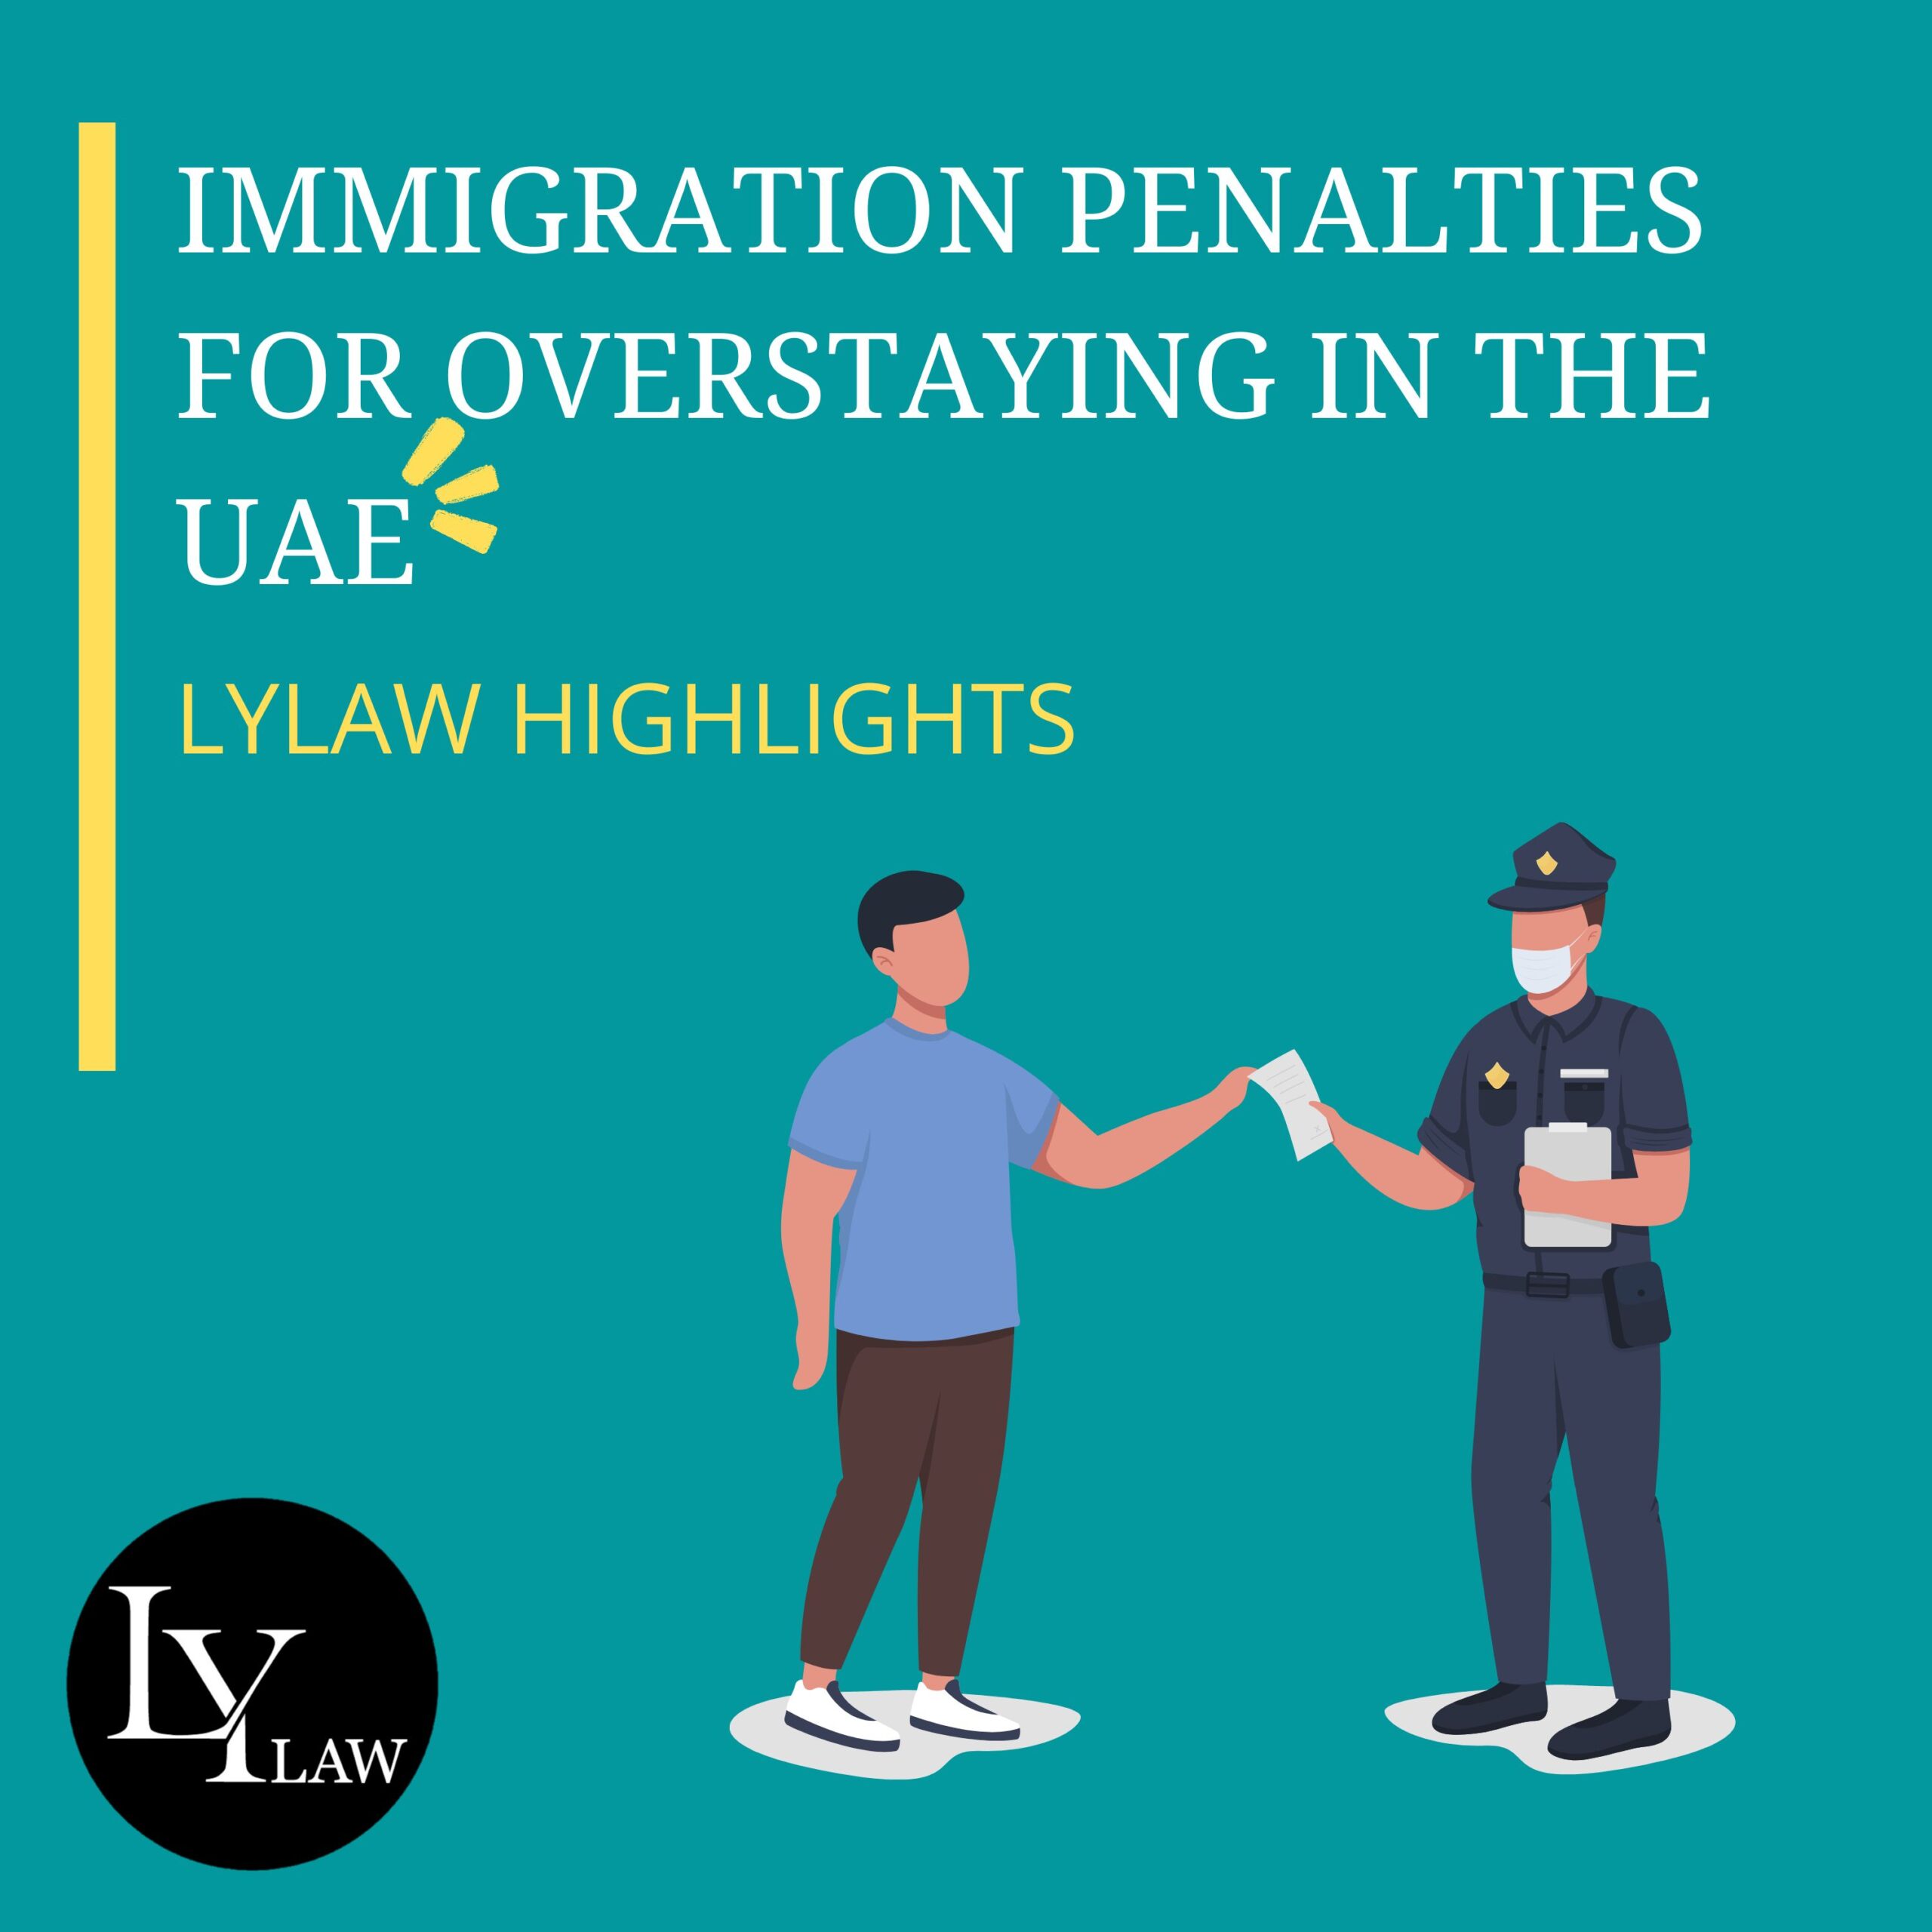 Penalties for overstaying in the UAE